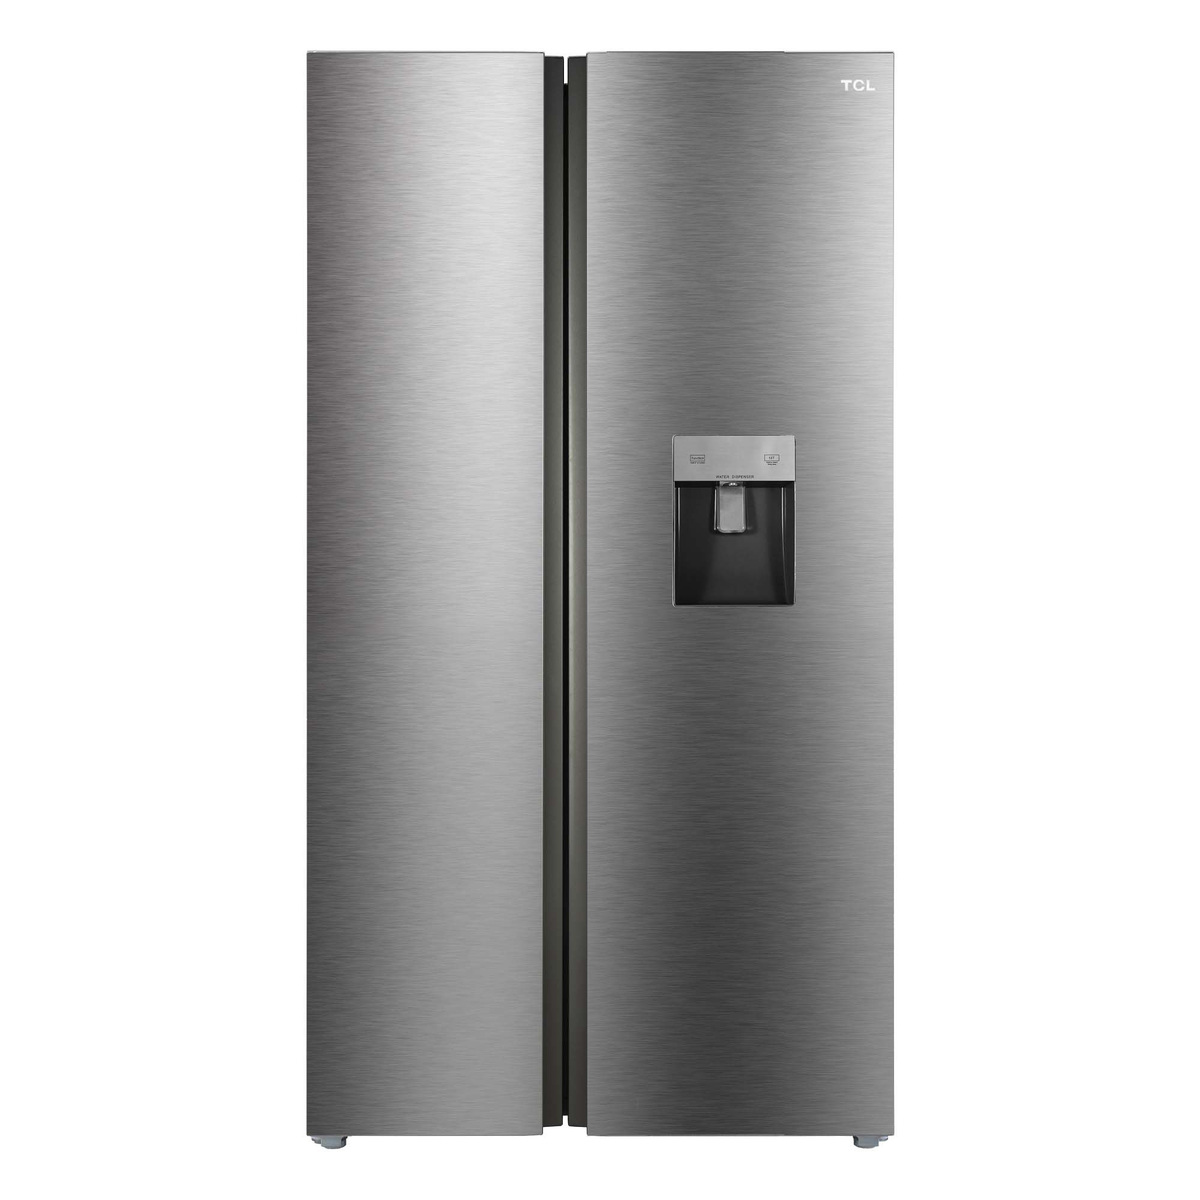 TCL Side by Side Refrigerator with Water Dispenser, 790 L, Inox, P790SBSNWD